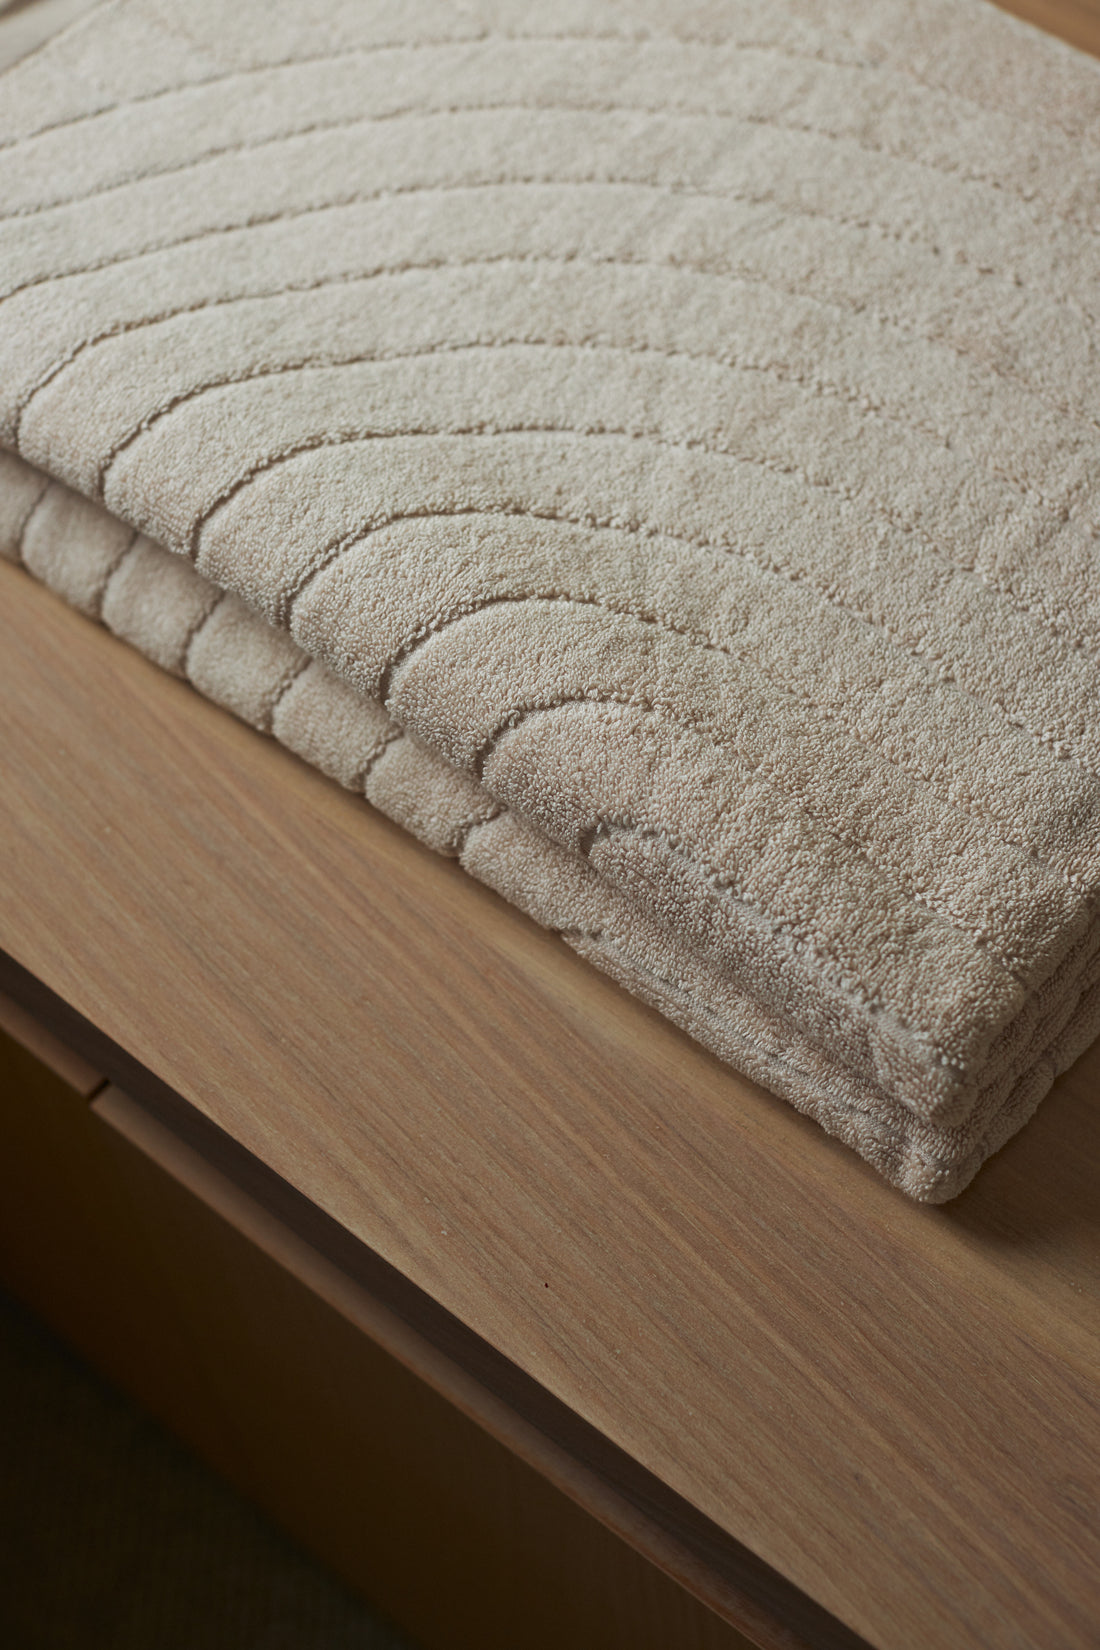 BAINA Cove Bath Towel - Clay | The Source - Leader in Luxury Kitchen & Bathroom Products in Adelaide, Australia